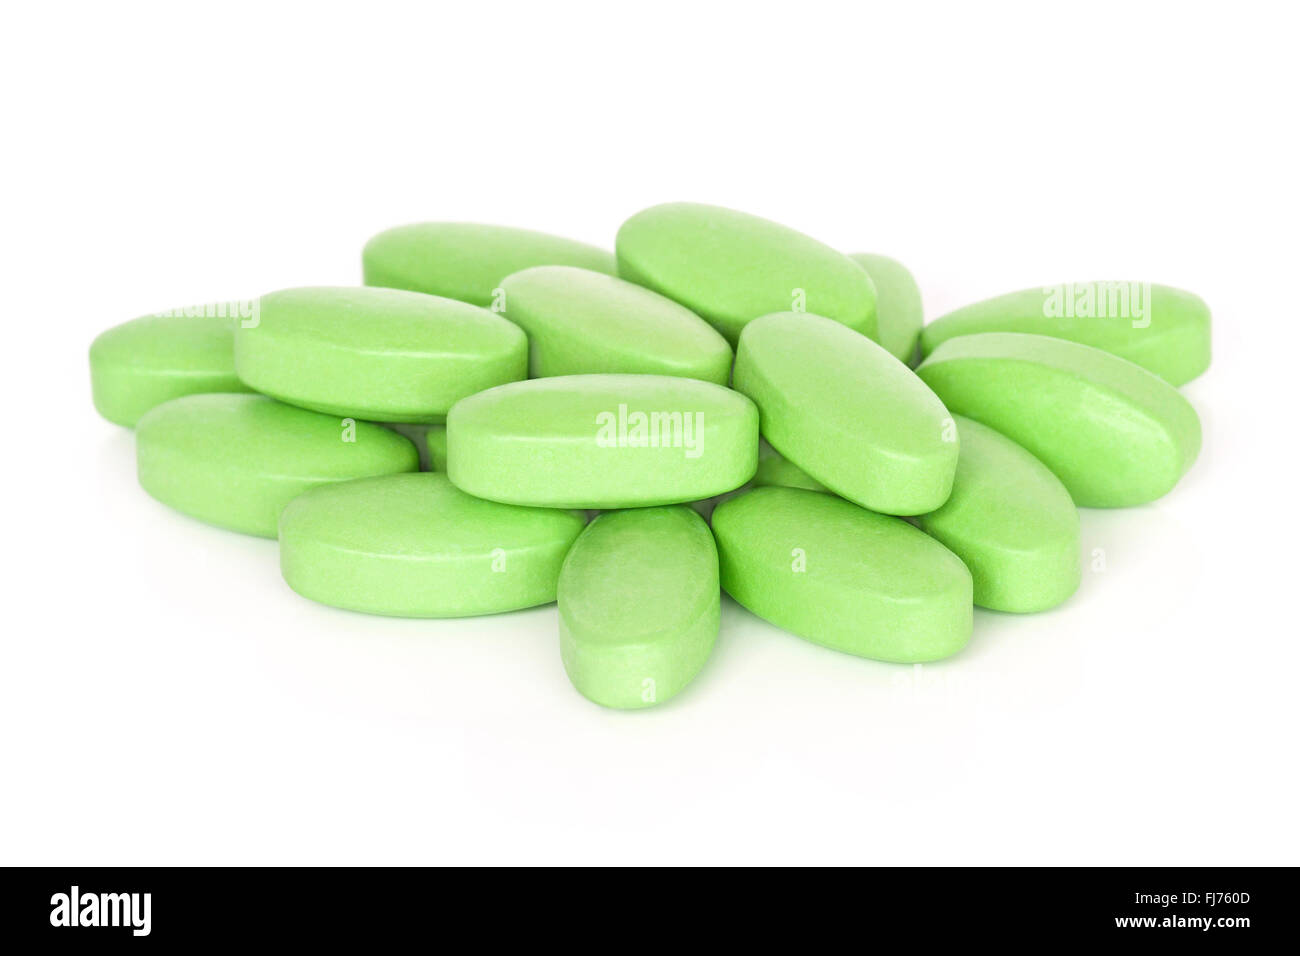 A pile of vitamin B supplement tablets isolated on a white background. Stock Photo